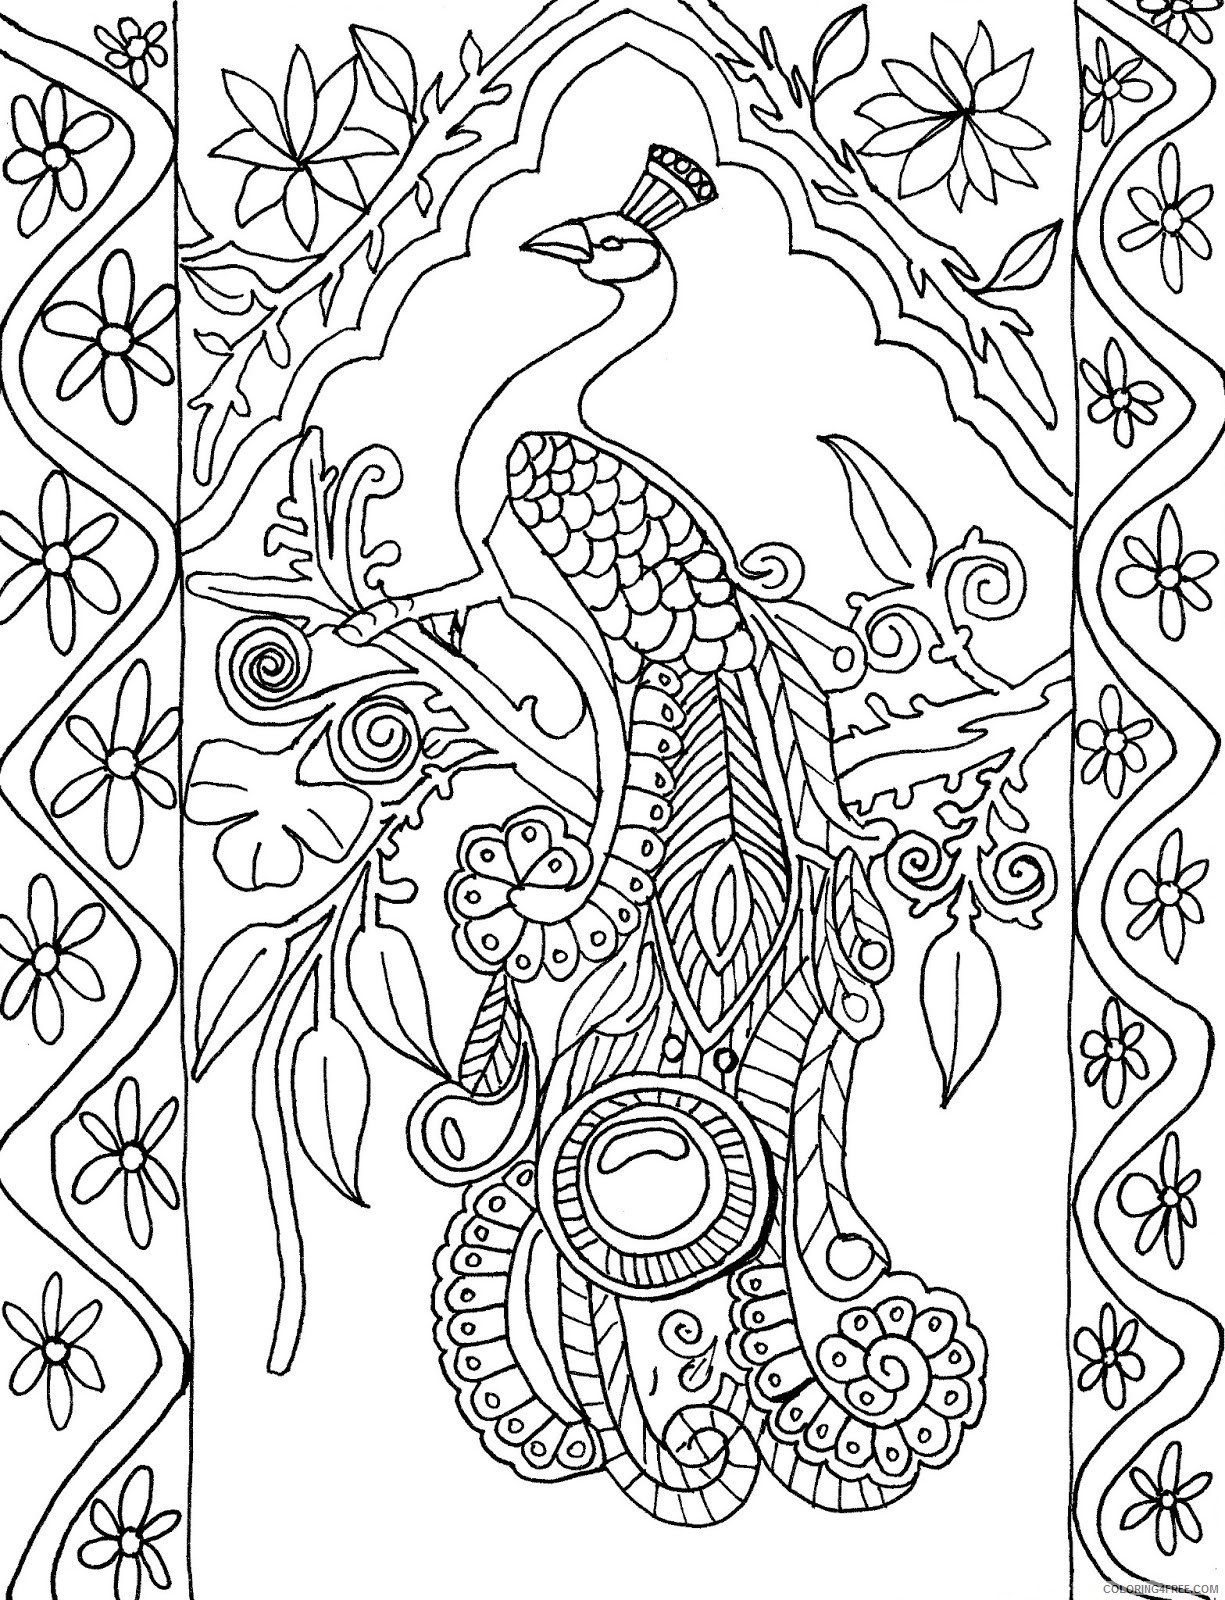 abstract peacock coloring pages for adults Coloring4free